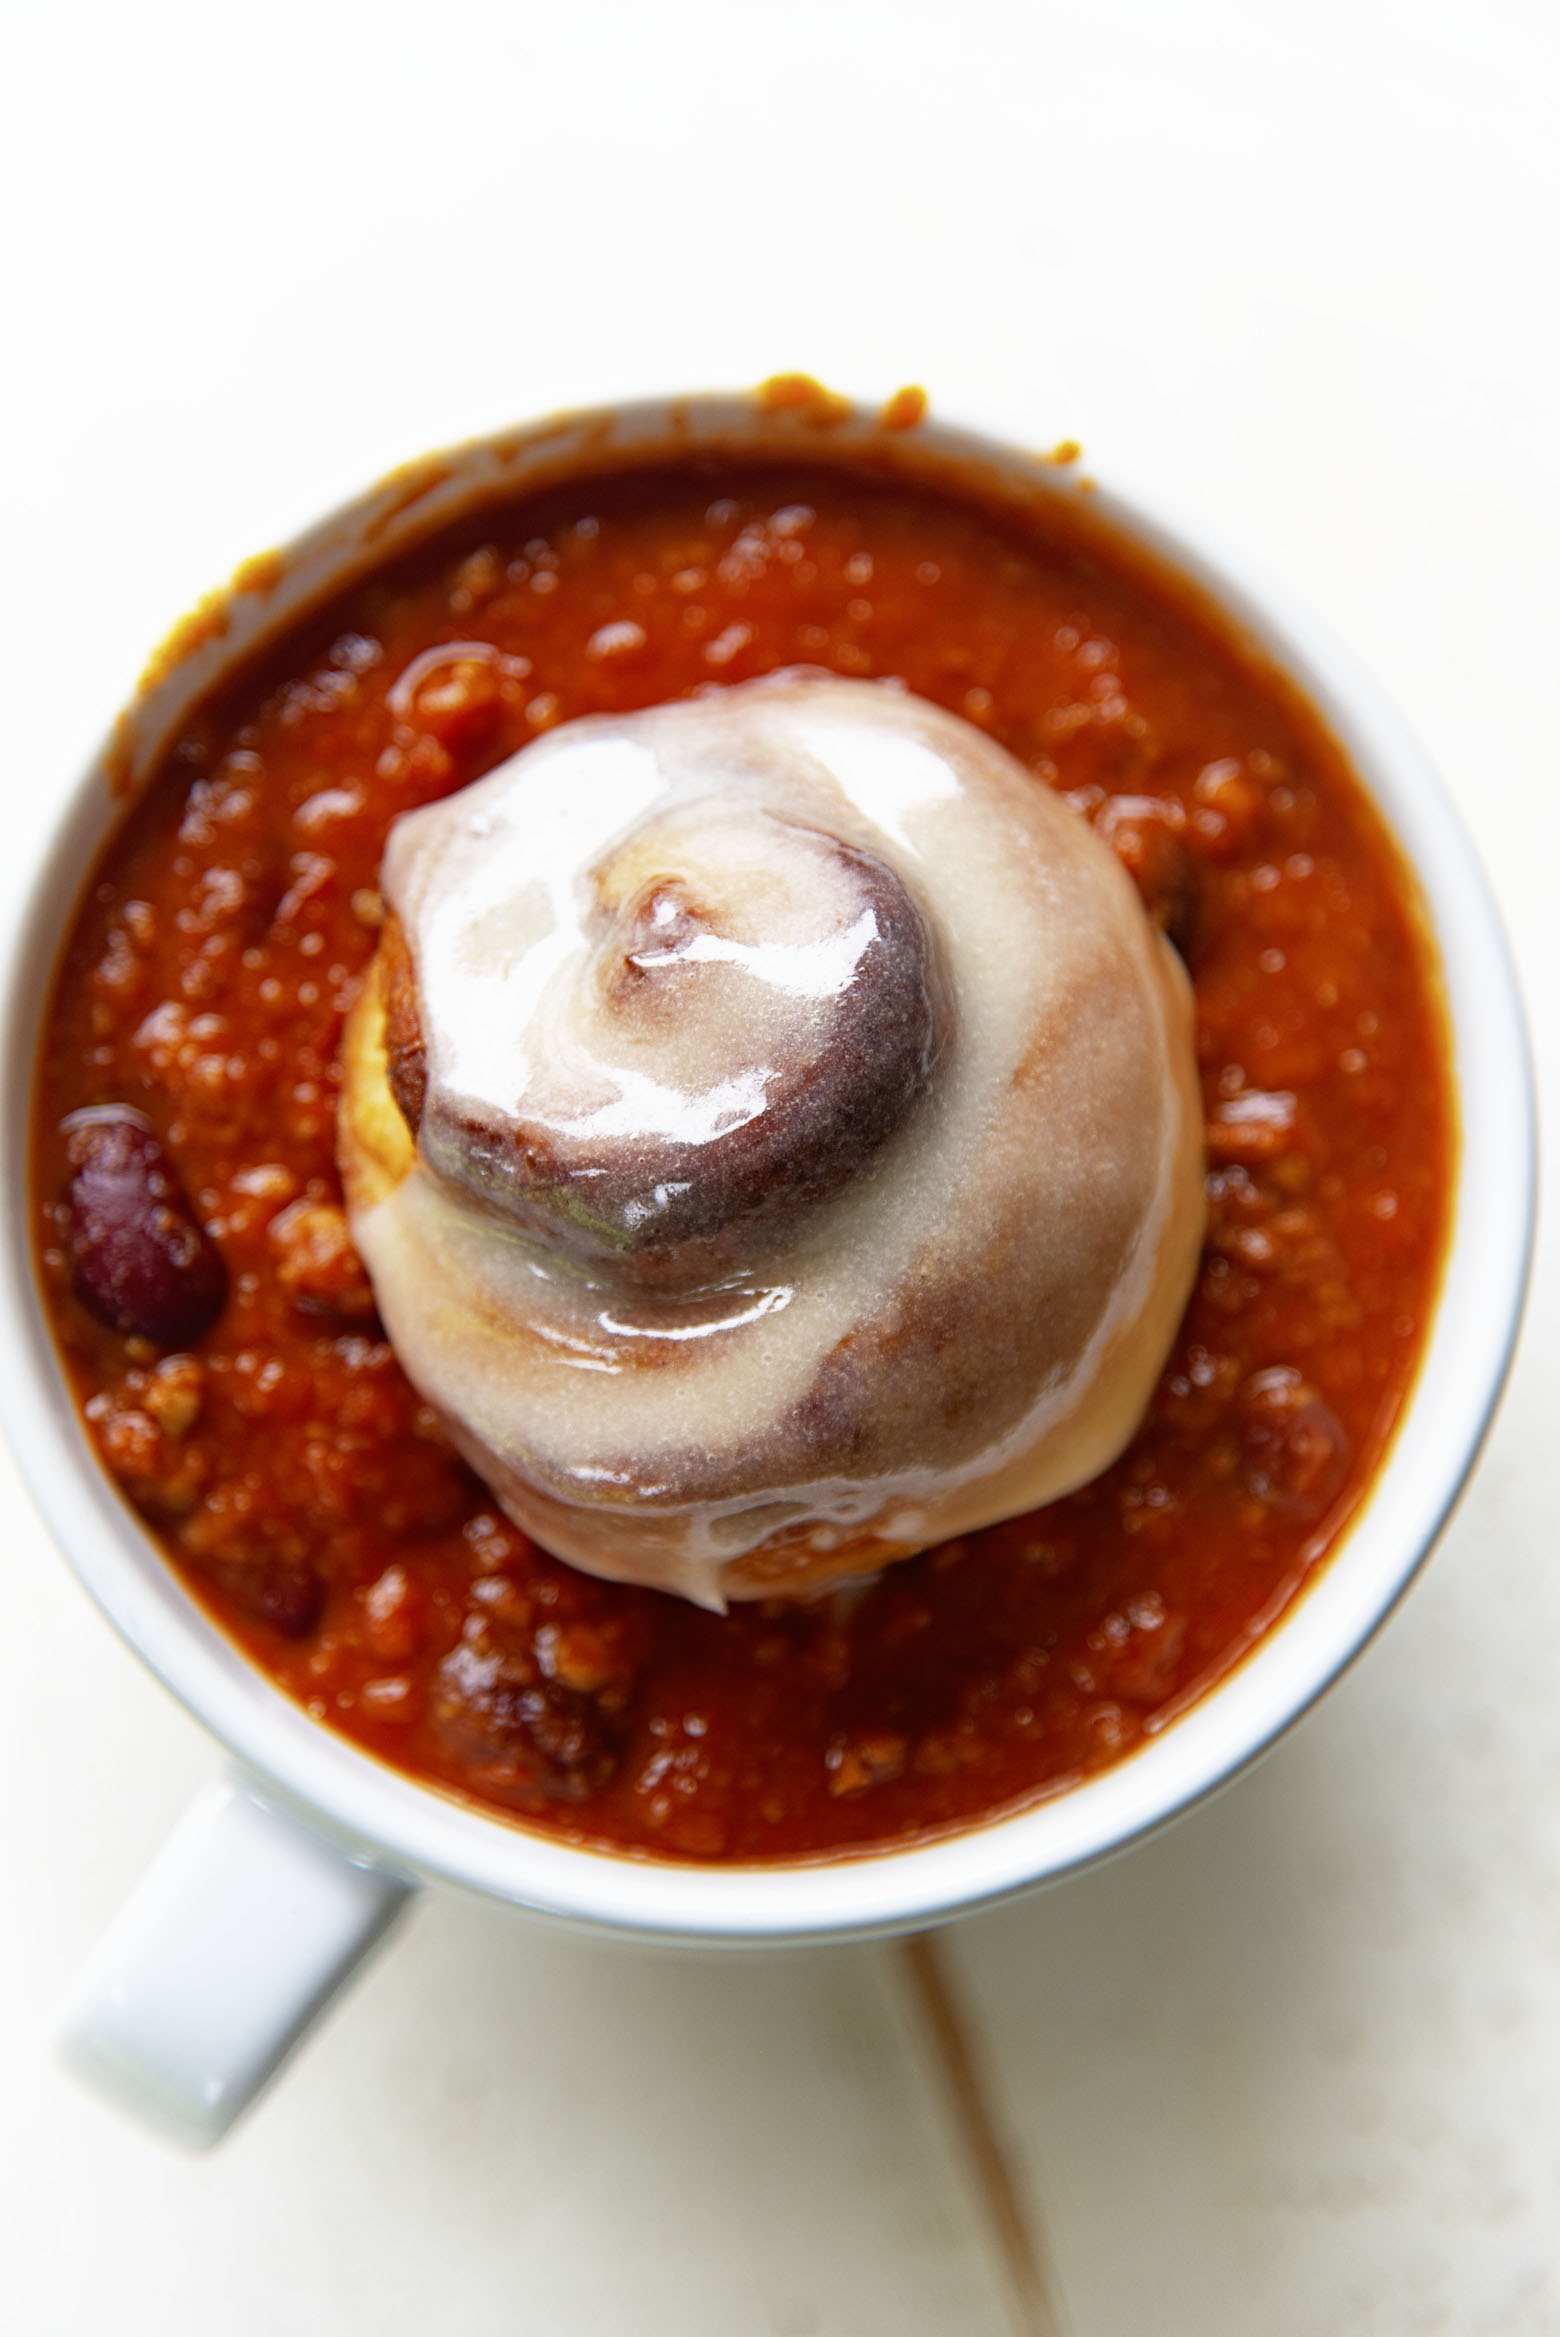 Overhead shot of cinnamon roll sitting in a bowl of chili. 